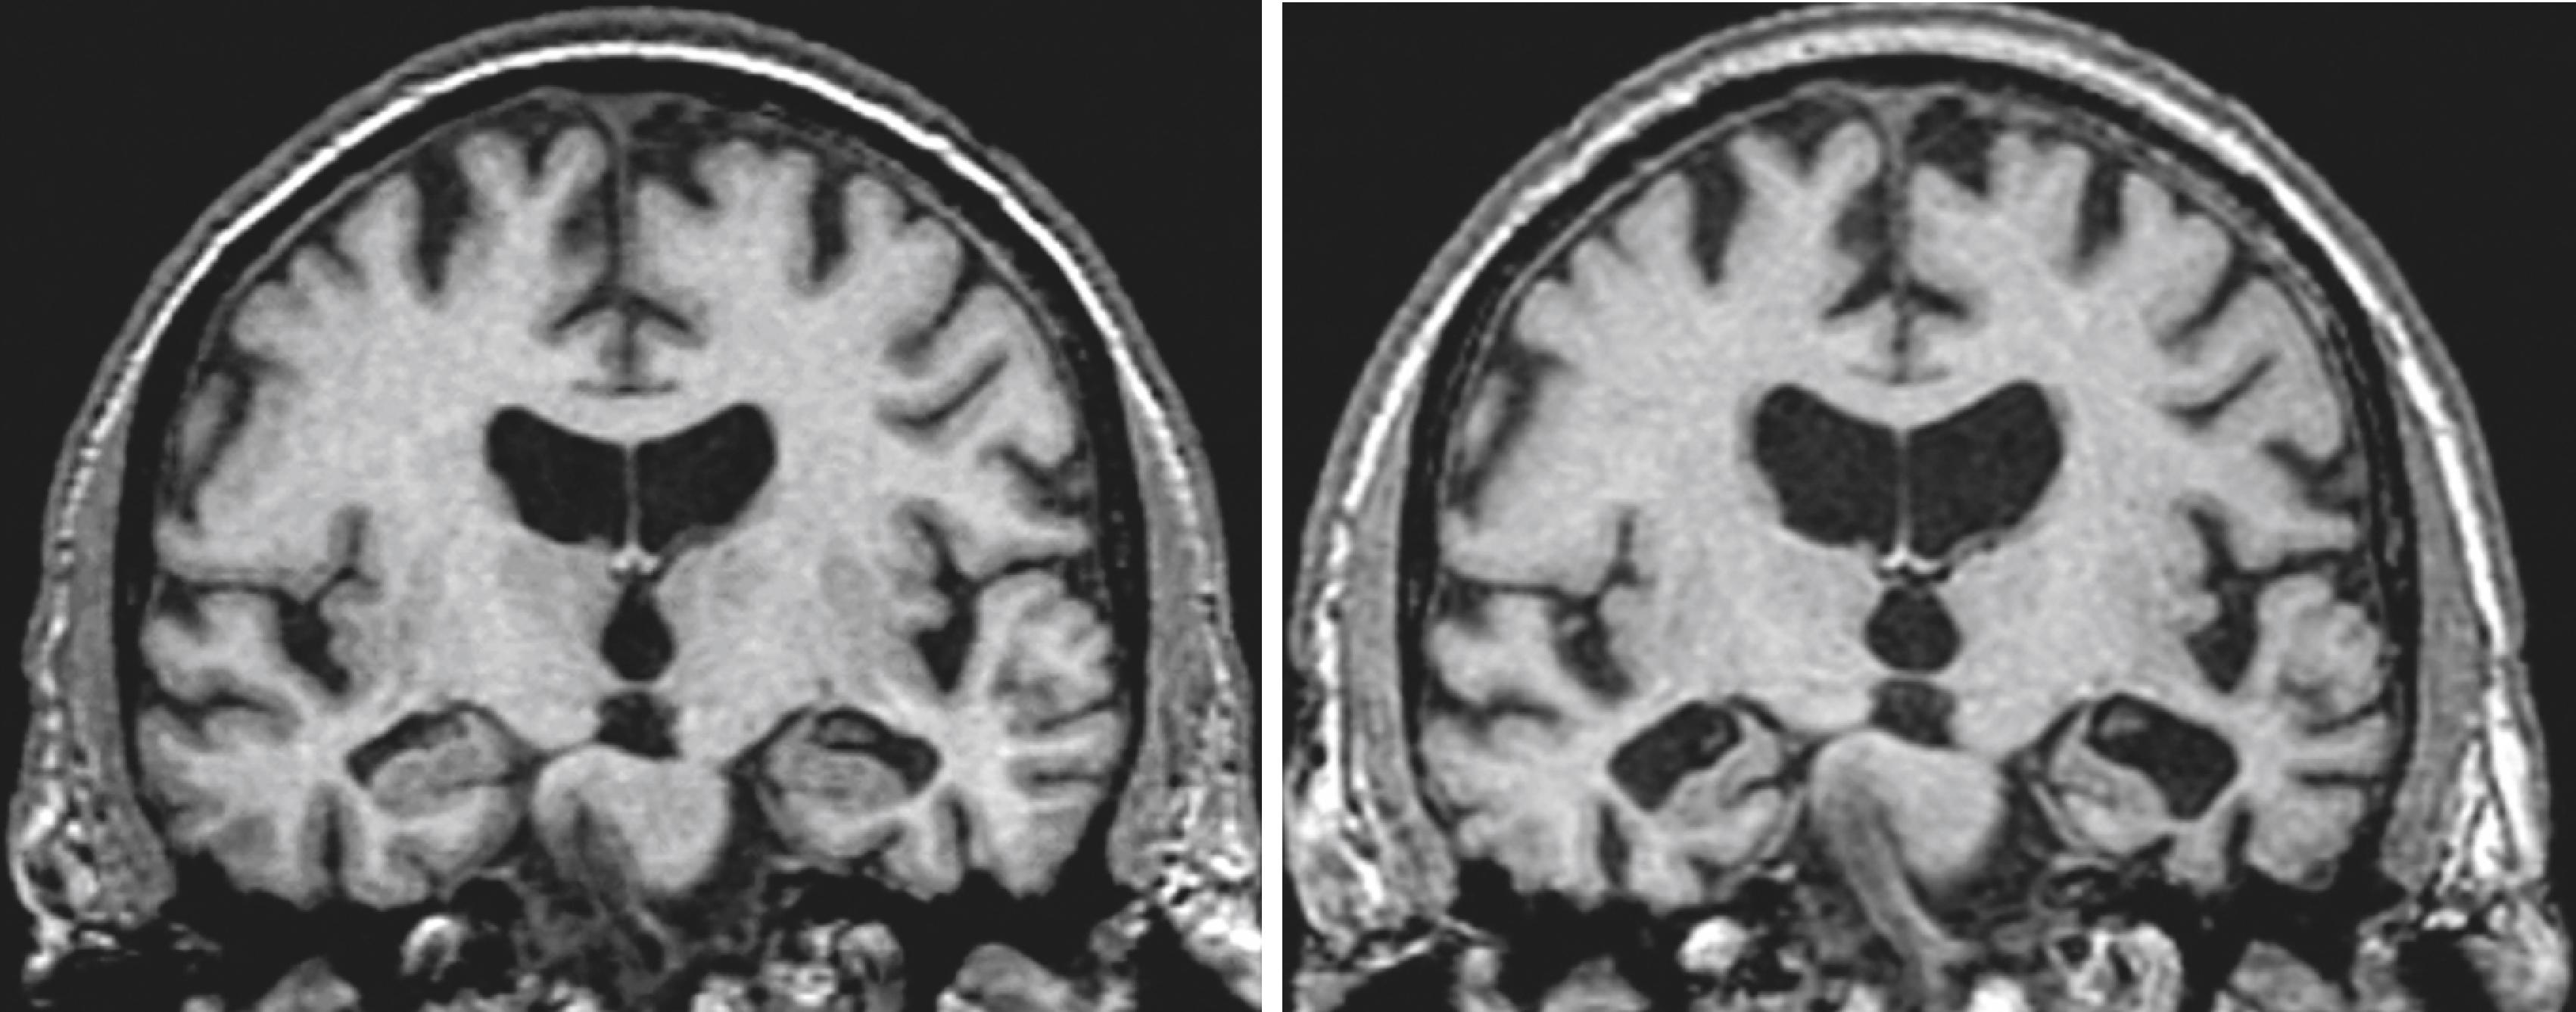 FIGURE 371-3, Serial coronal images from magnetic resonance imaging of a patient with Alzheimer disease.